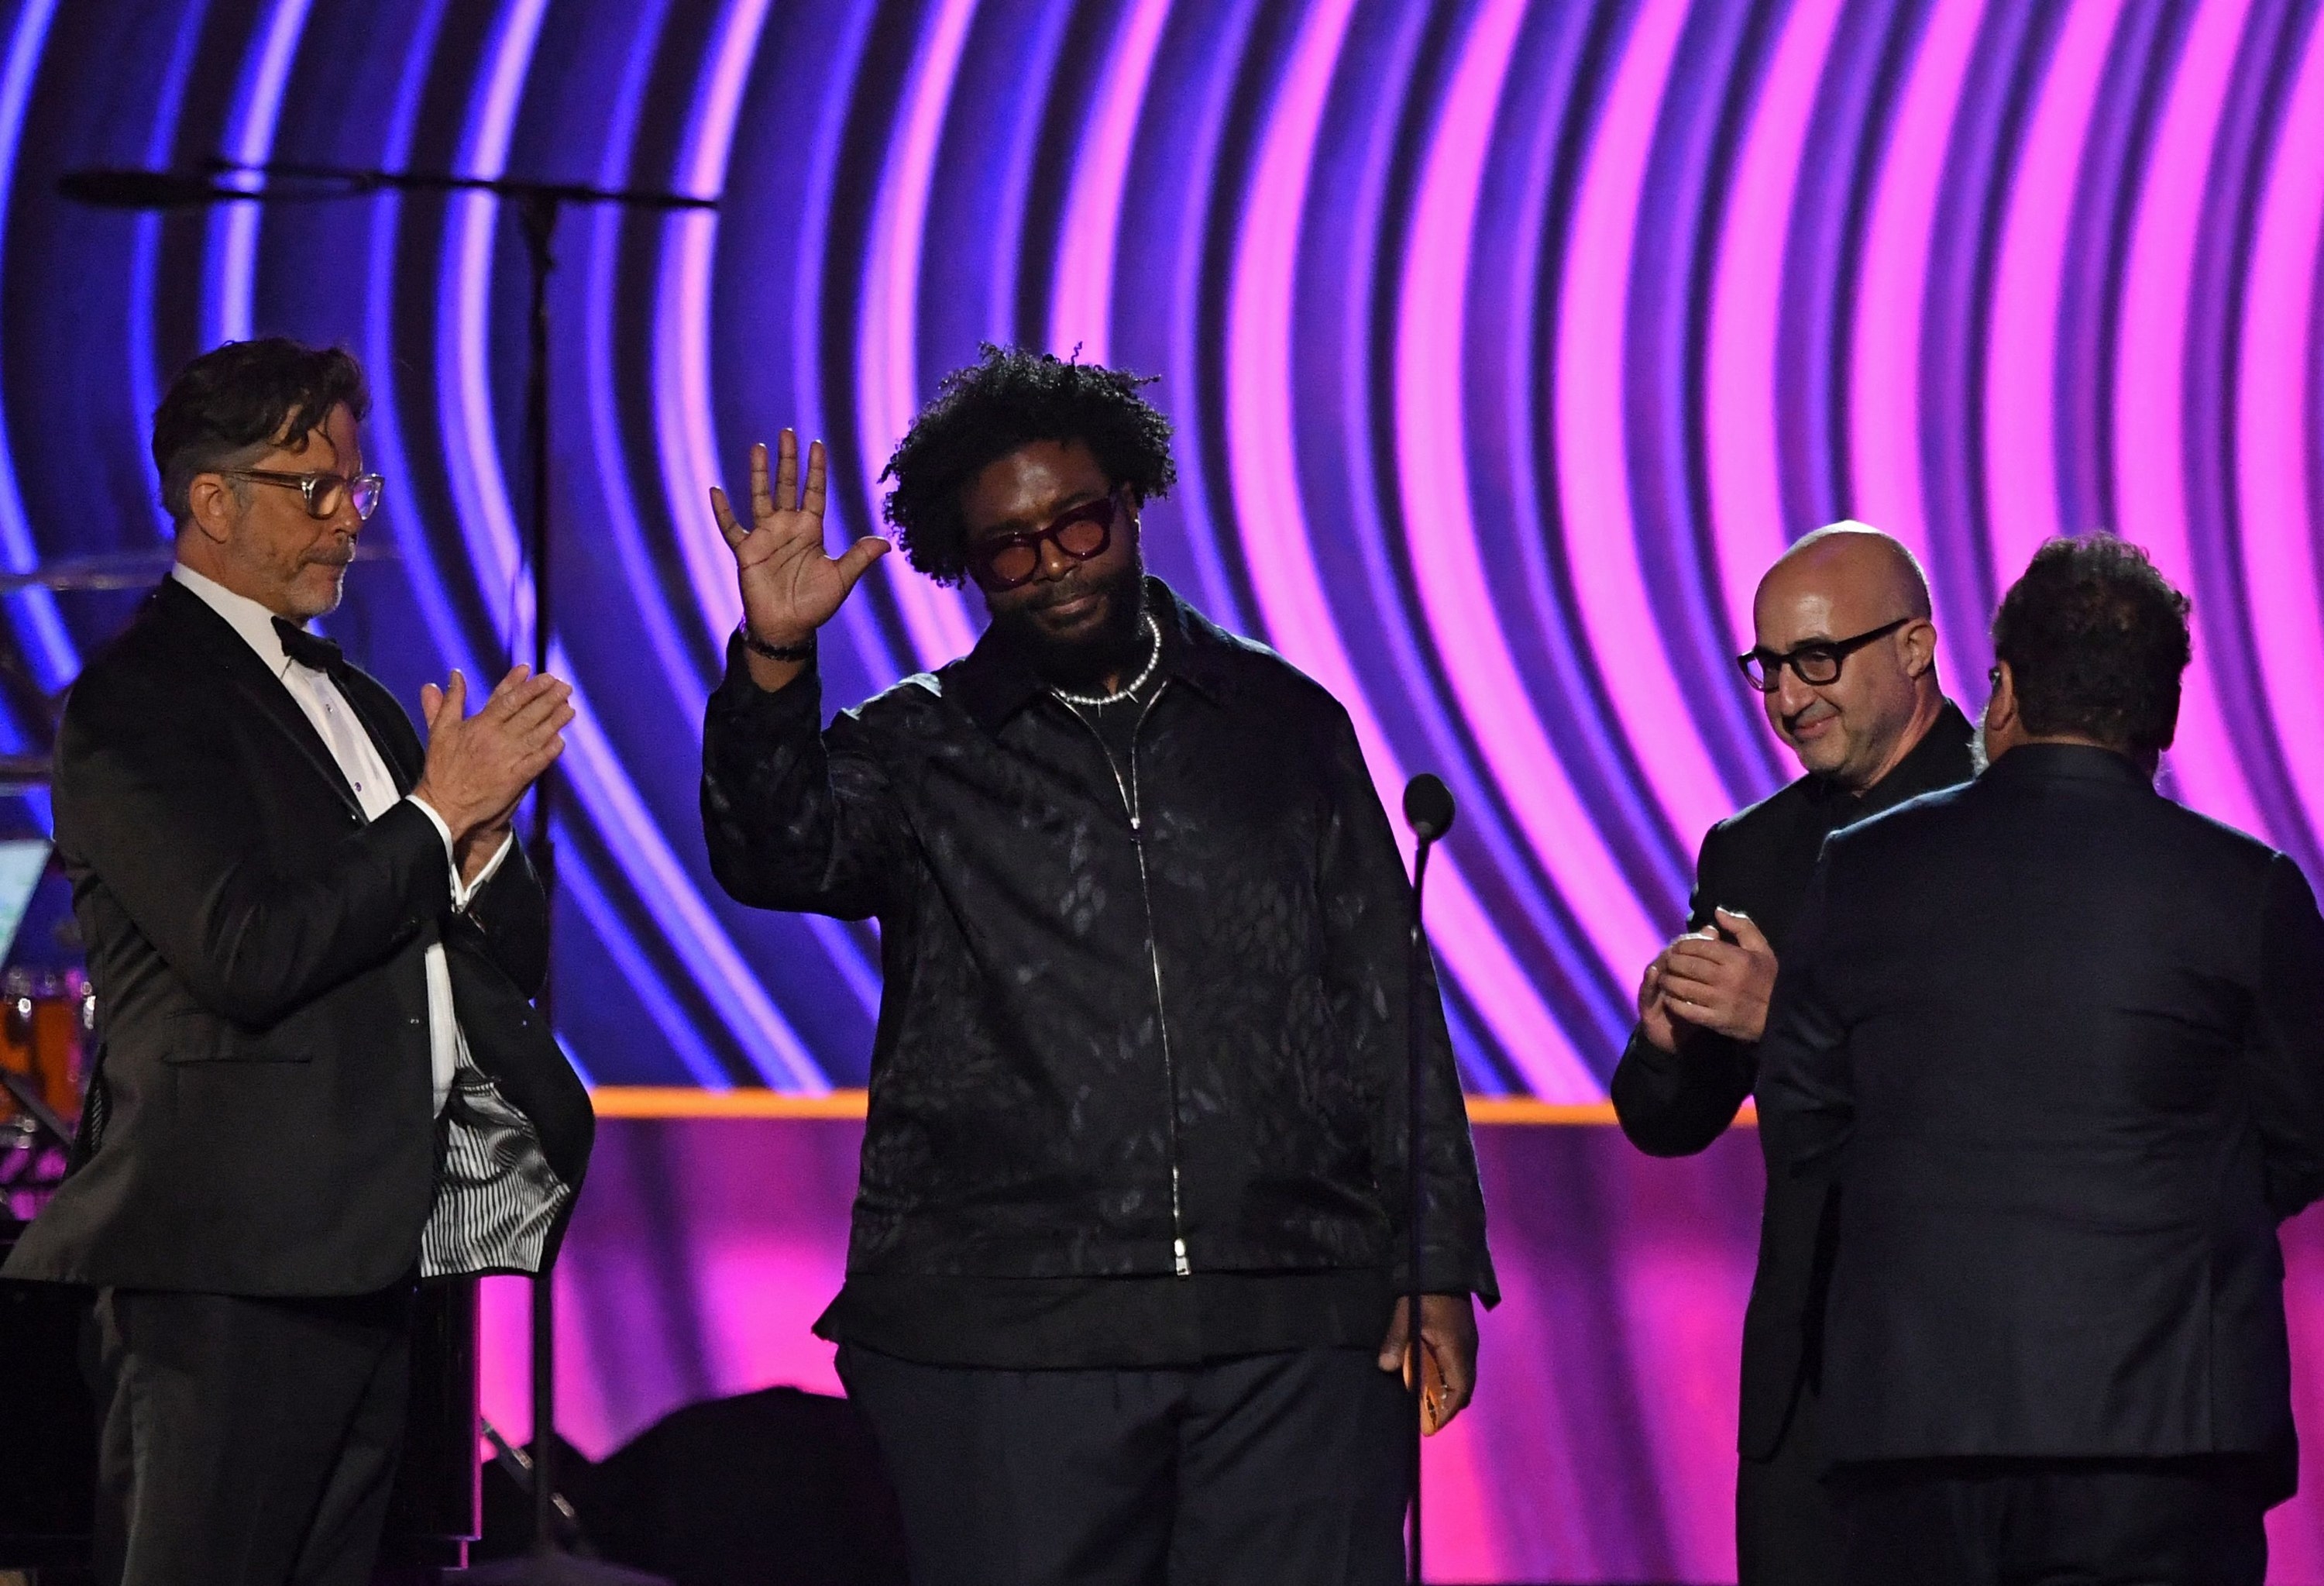 Questlove waves to the crowd onstage